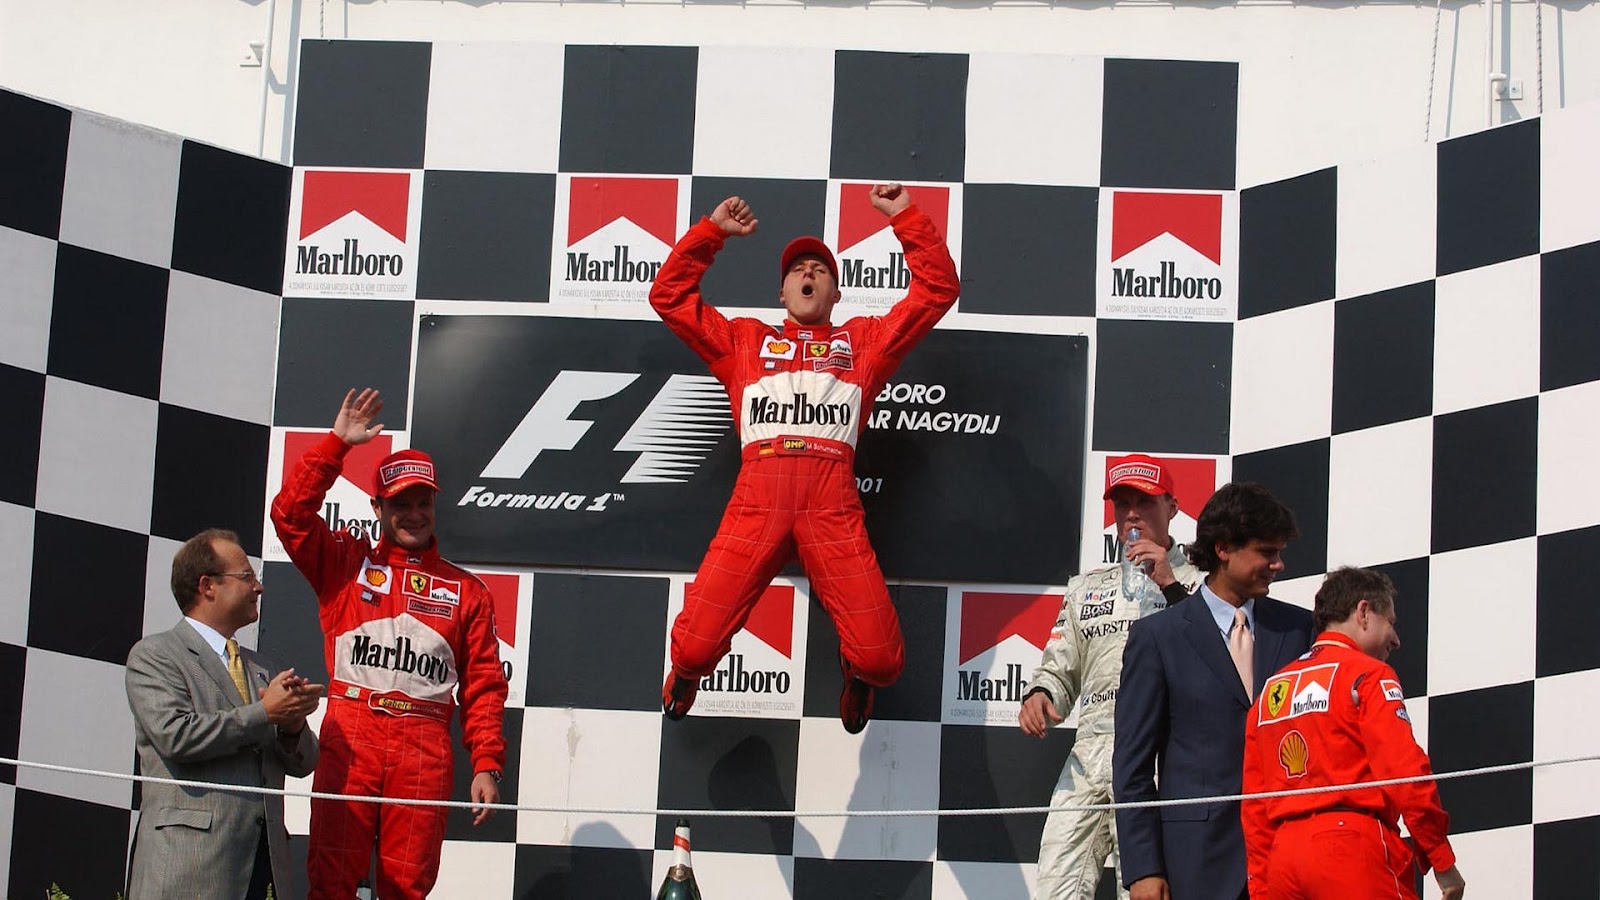 Micheal Schumacher jumps in celebration at the top of the podium